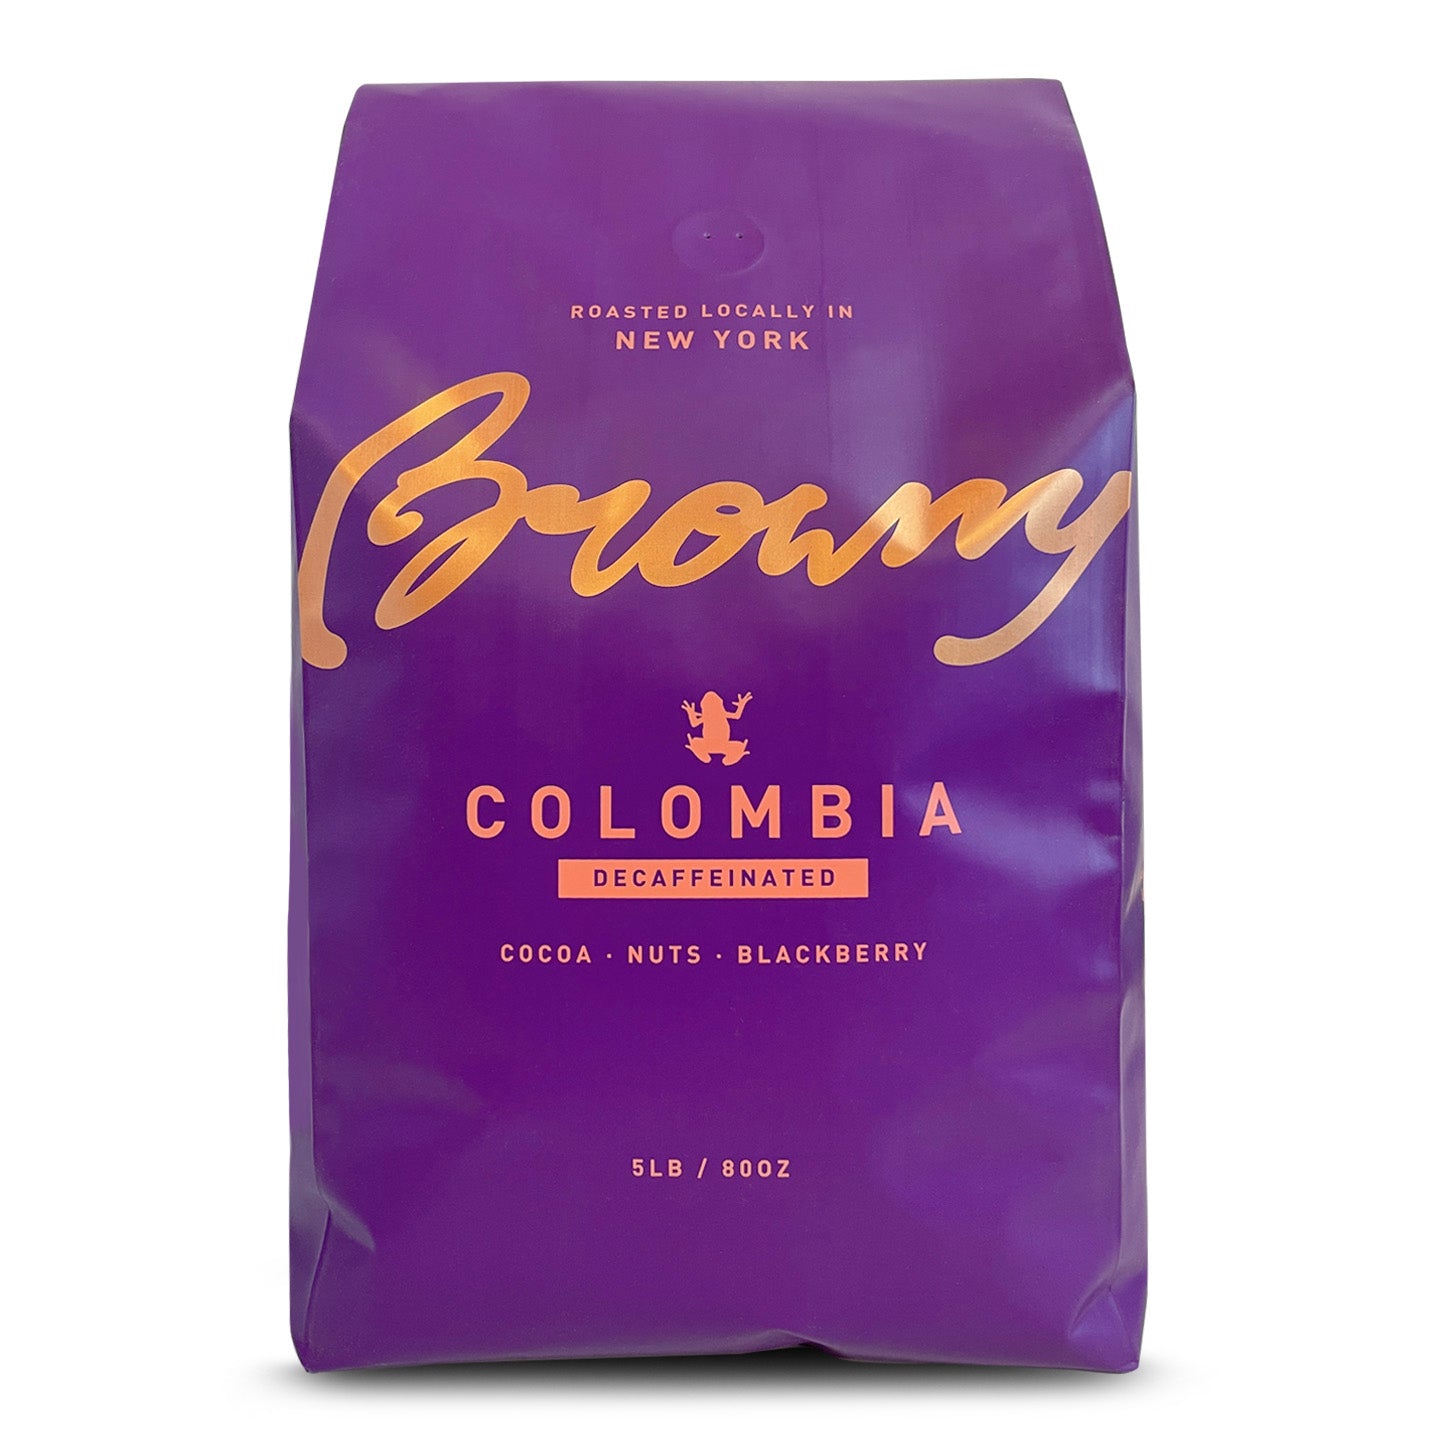 COLOMBIA, Decaf